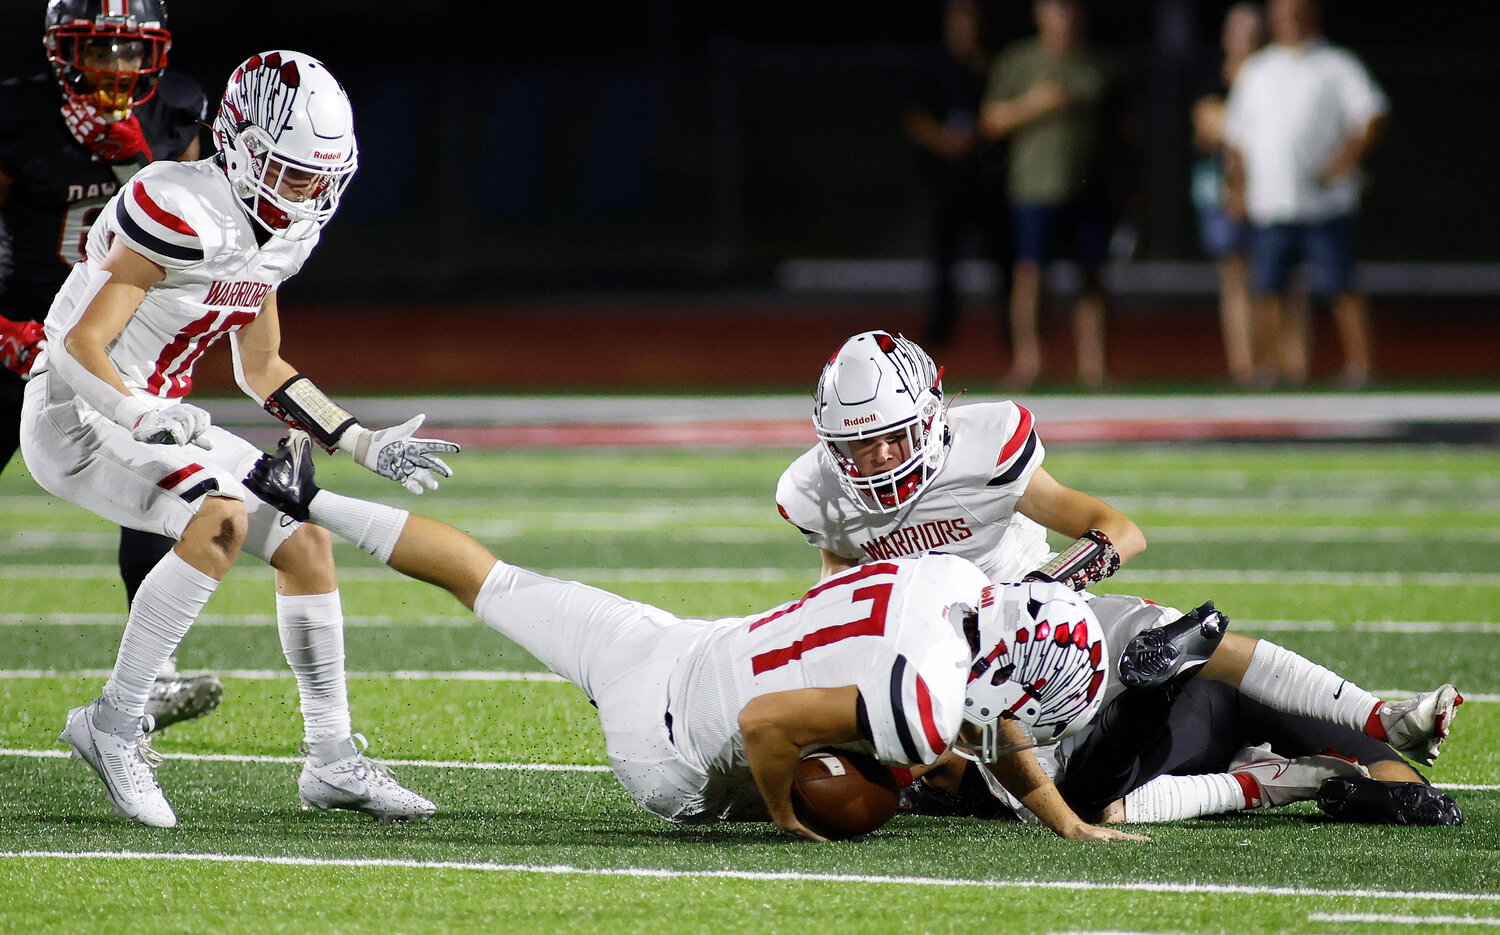 Warrenton's Brody Reel (17) dives for a loose ball during a game against Fort Zumwalt South, Friday, Aug. 25, 2023, at Fort Zumwalt South High School in St. Peters, Mo.